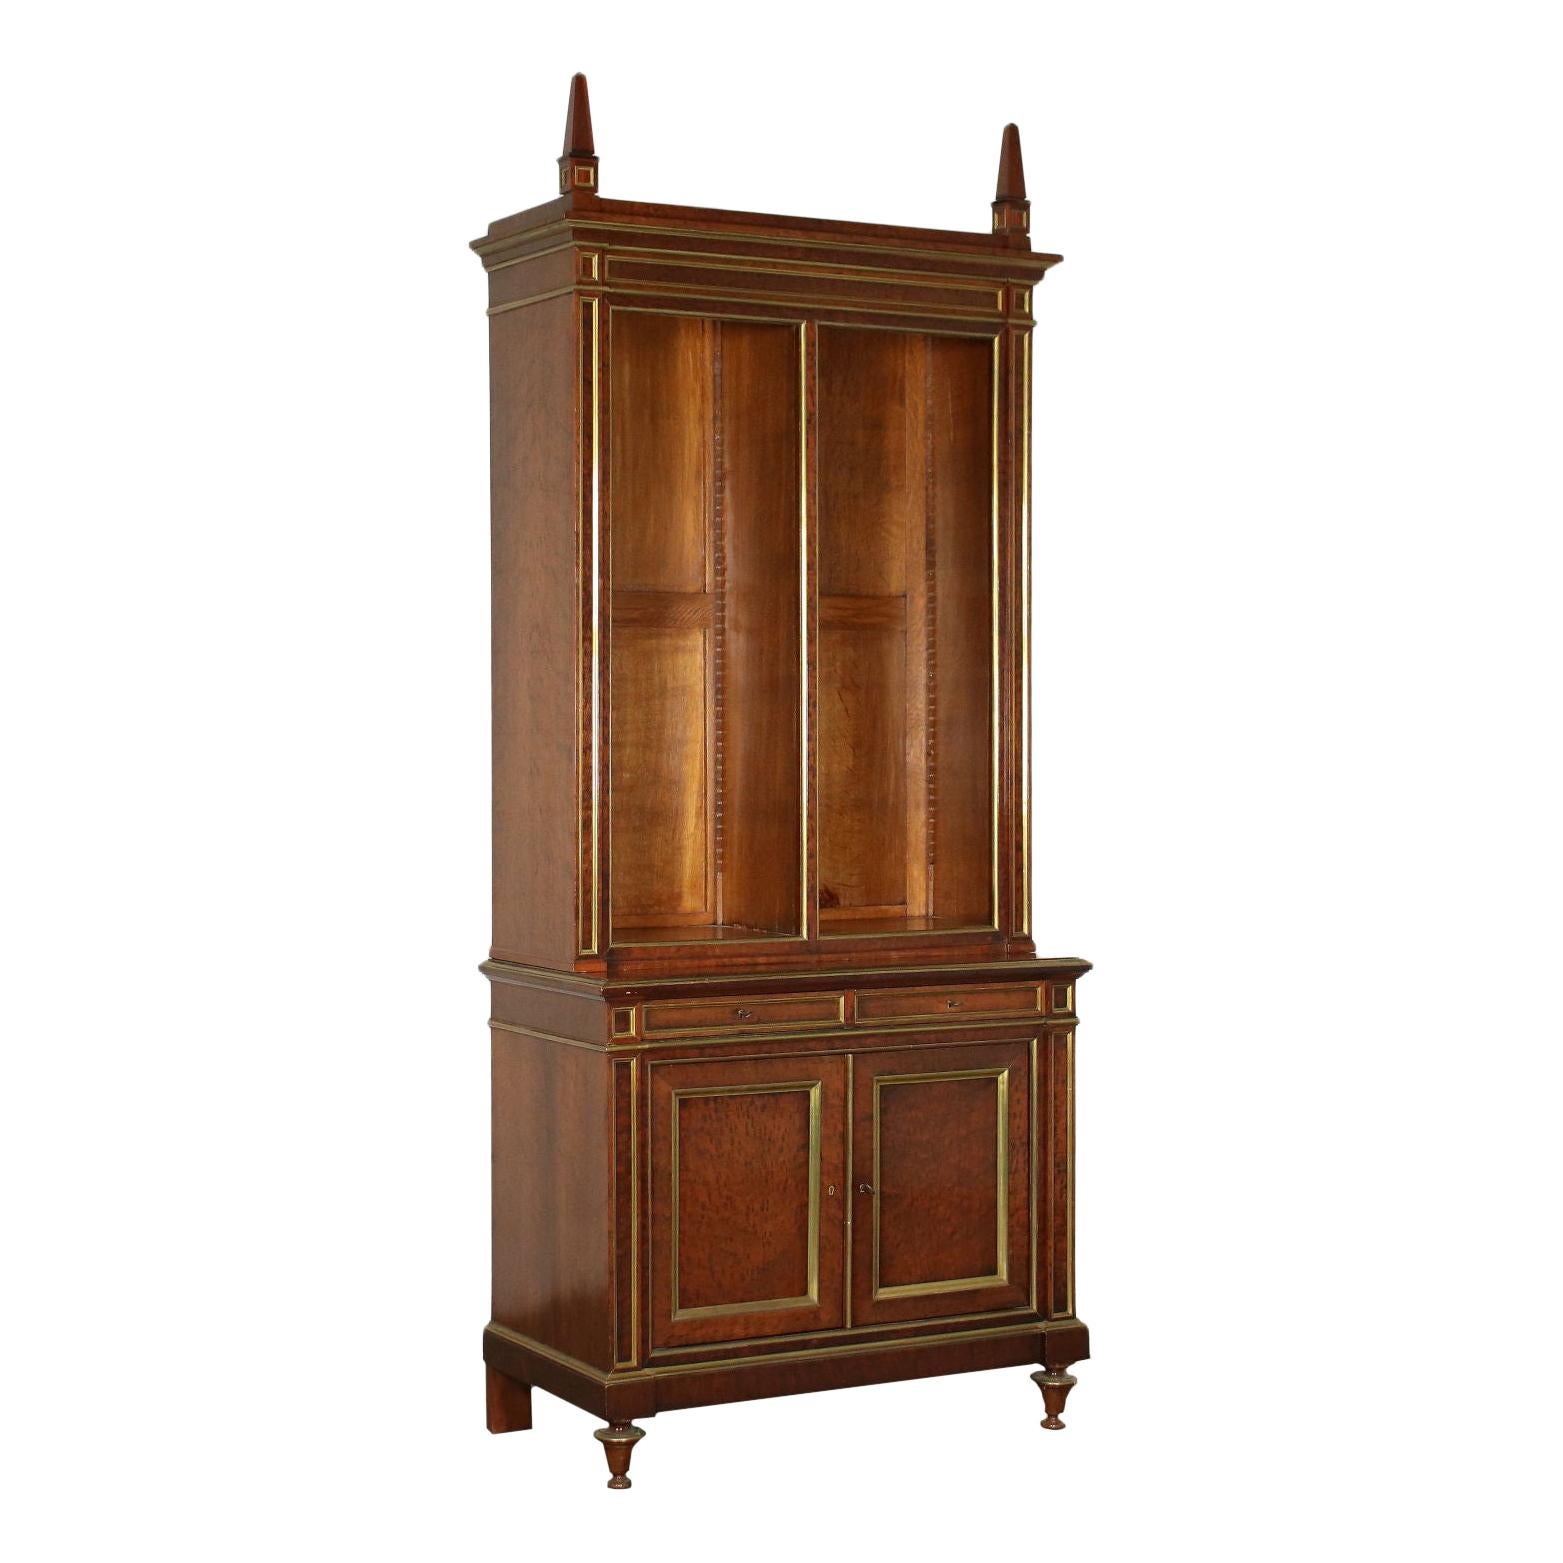 Bookcase Empire Mahogany Veneer Sessile Oak France Early 19th Century For Sale